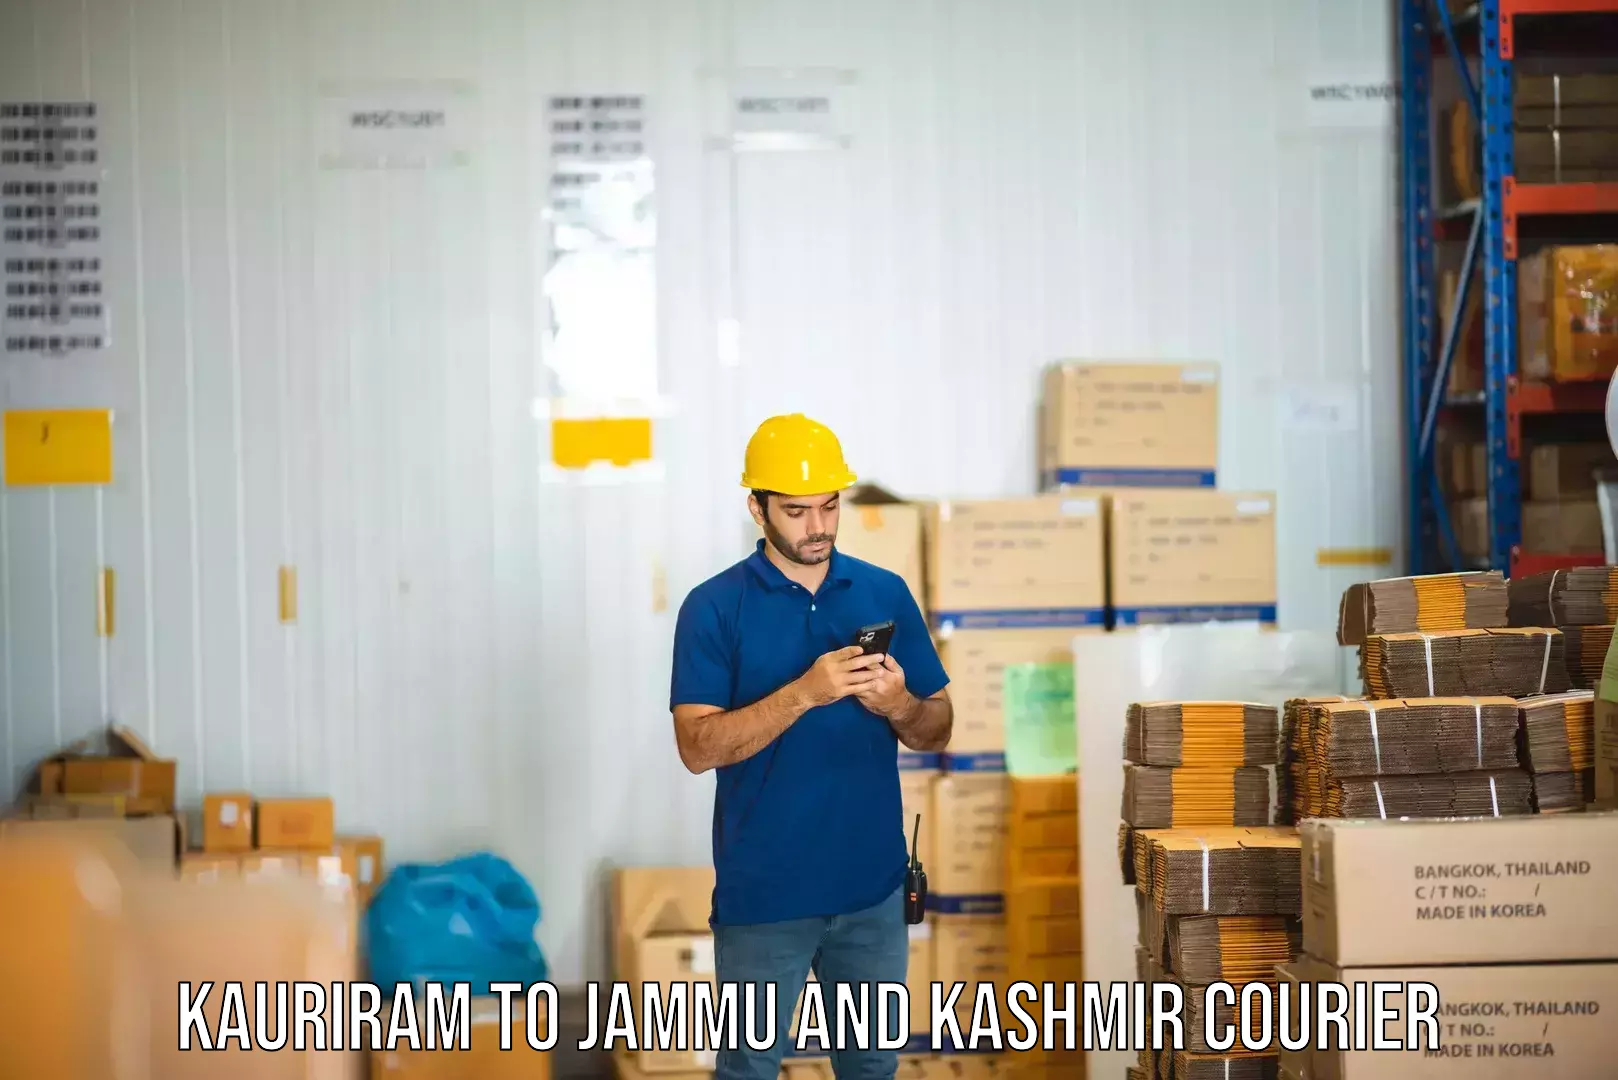 Professional courier handling in Kauriram to Jammu and Kashmir